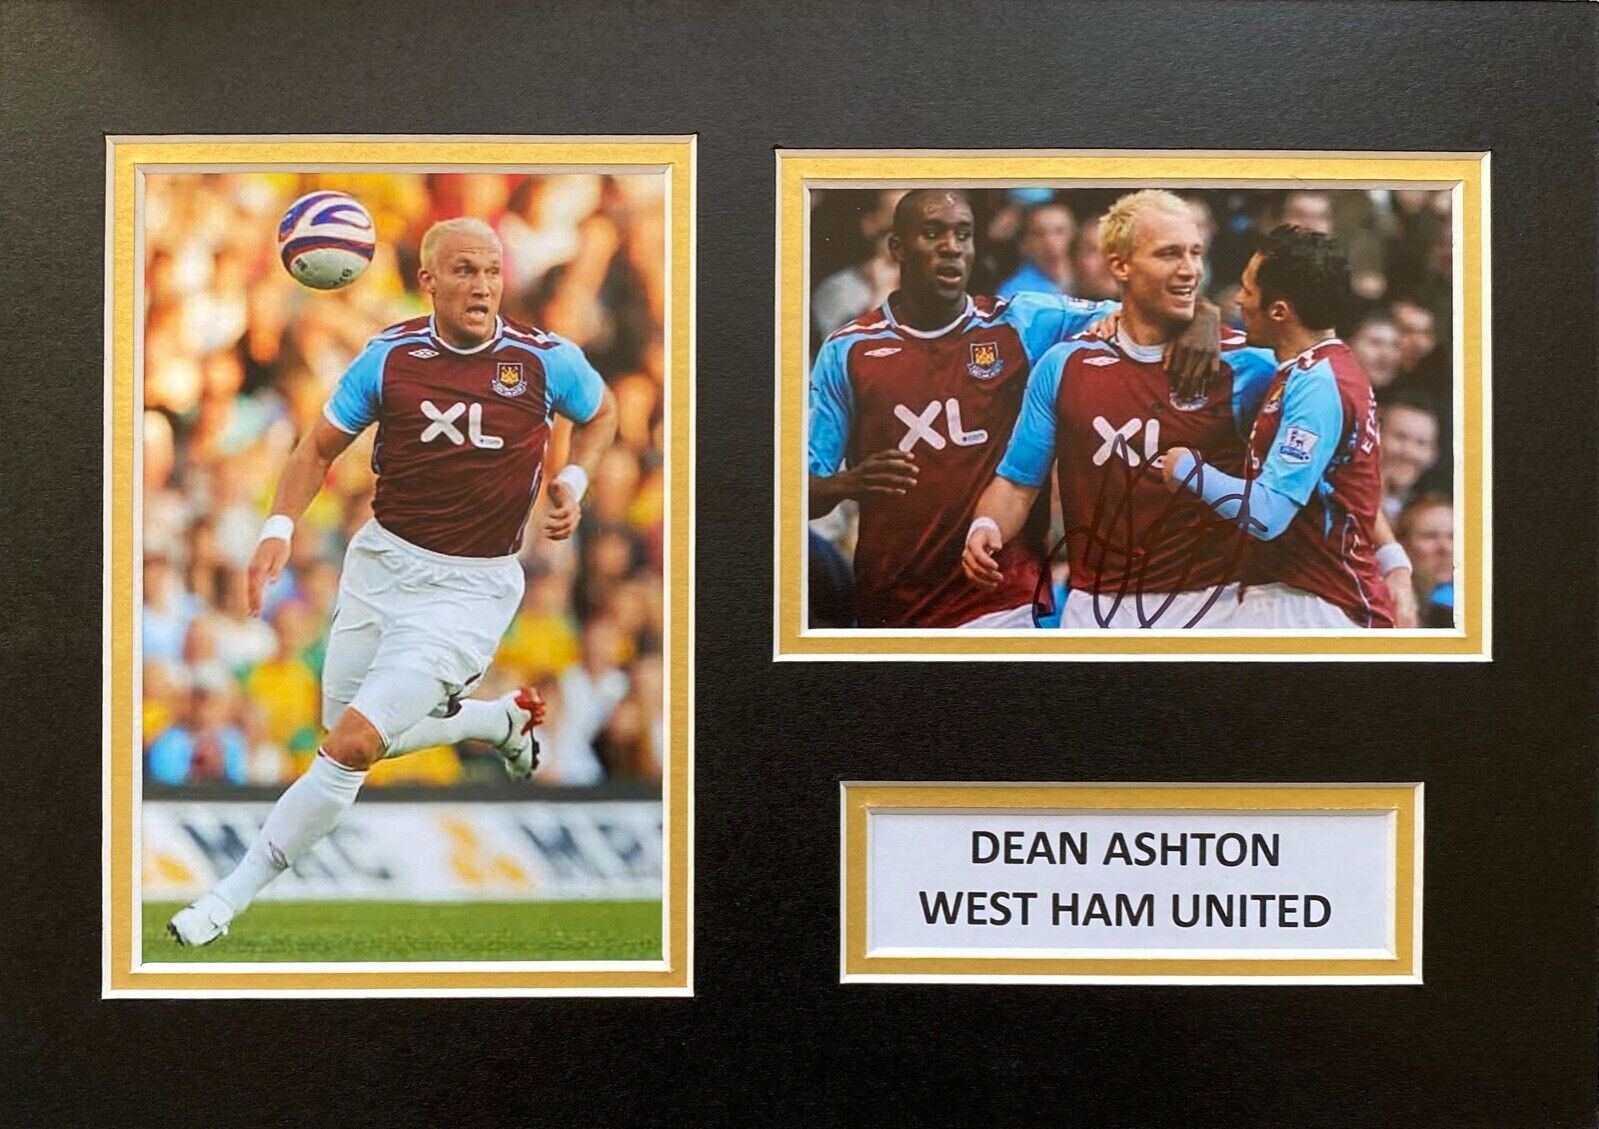 DEAN ASHTON HAND SIGNED A4 Photo Poster painting MOUNT DISPLAY WEST HAM UNITED AUTOGRAPH 3